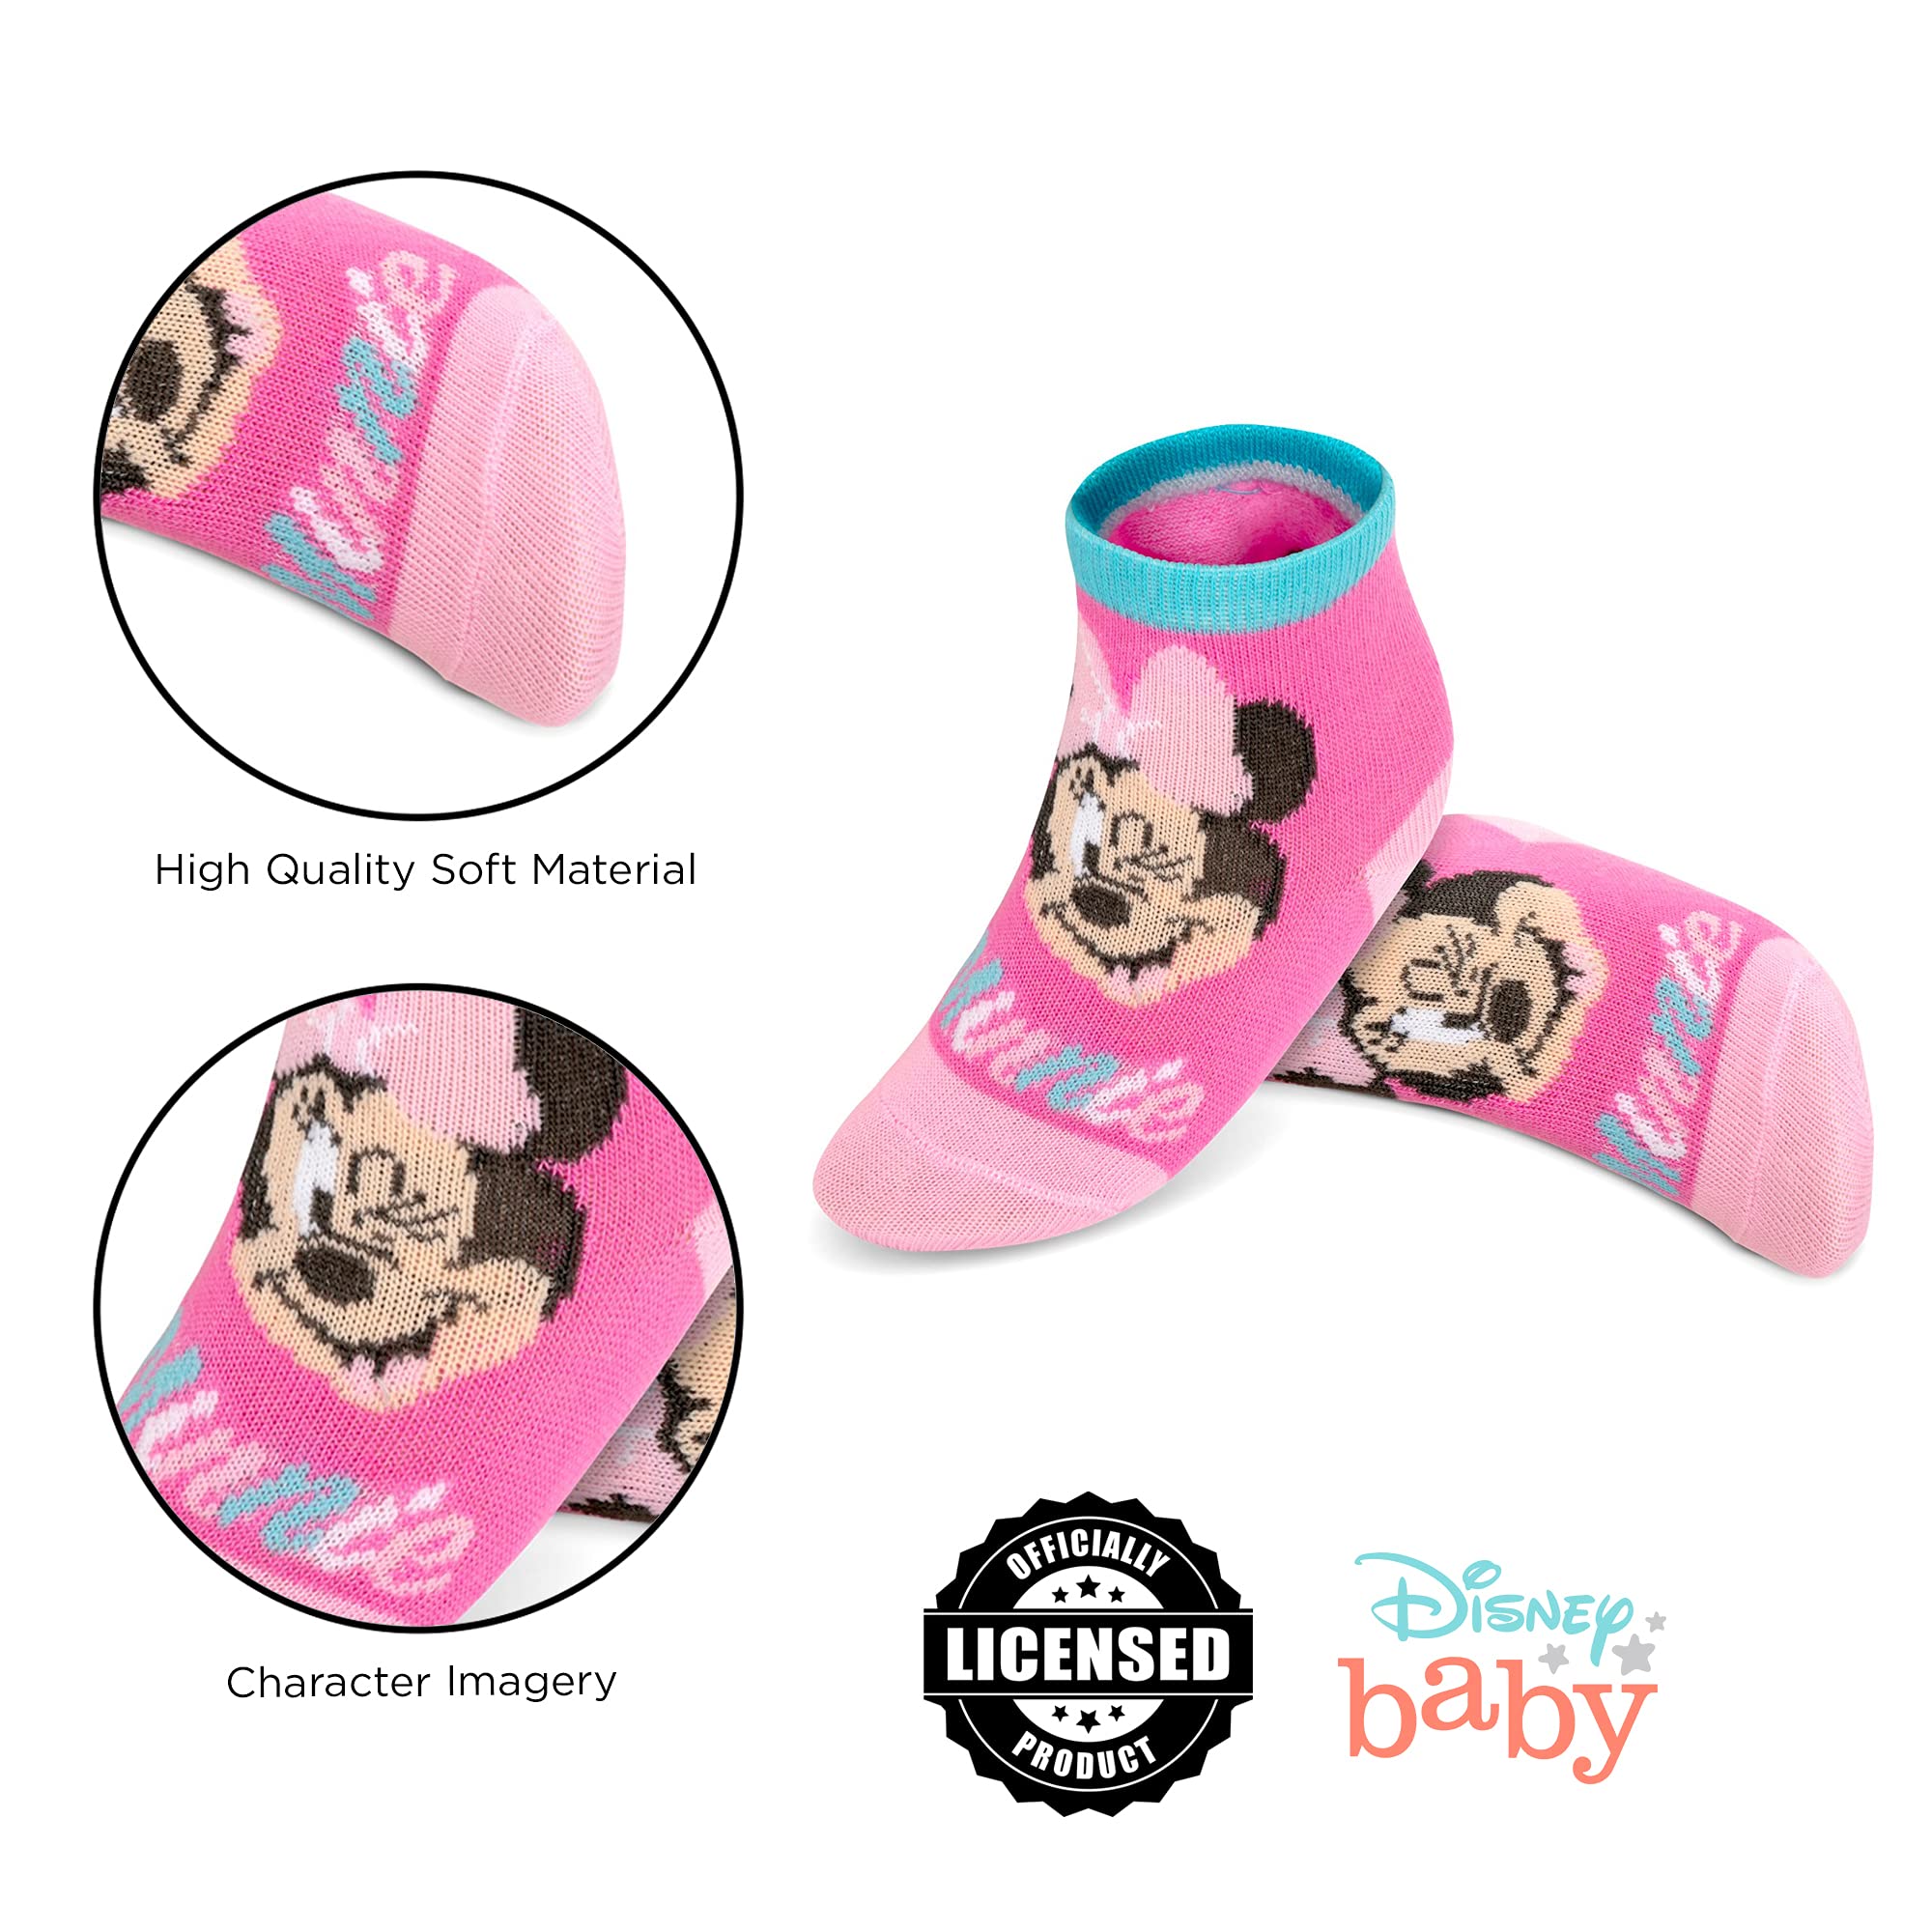 Disney baby-girls Minnie Mouse Baby Girl 10-pack Infant Sock, Multicolor - 0-24 Months